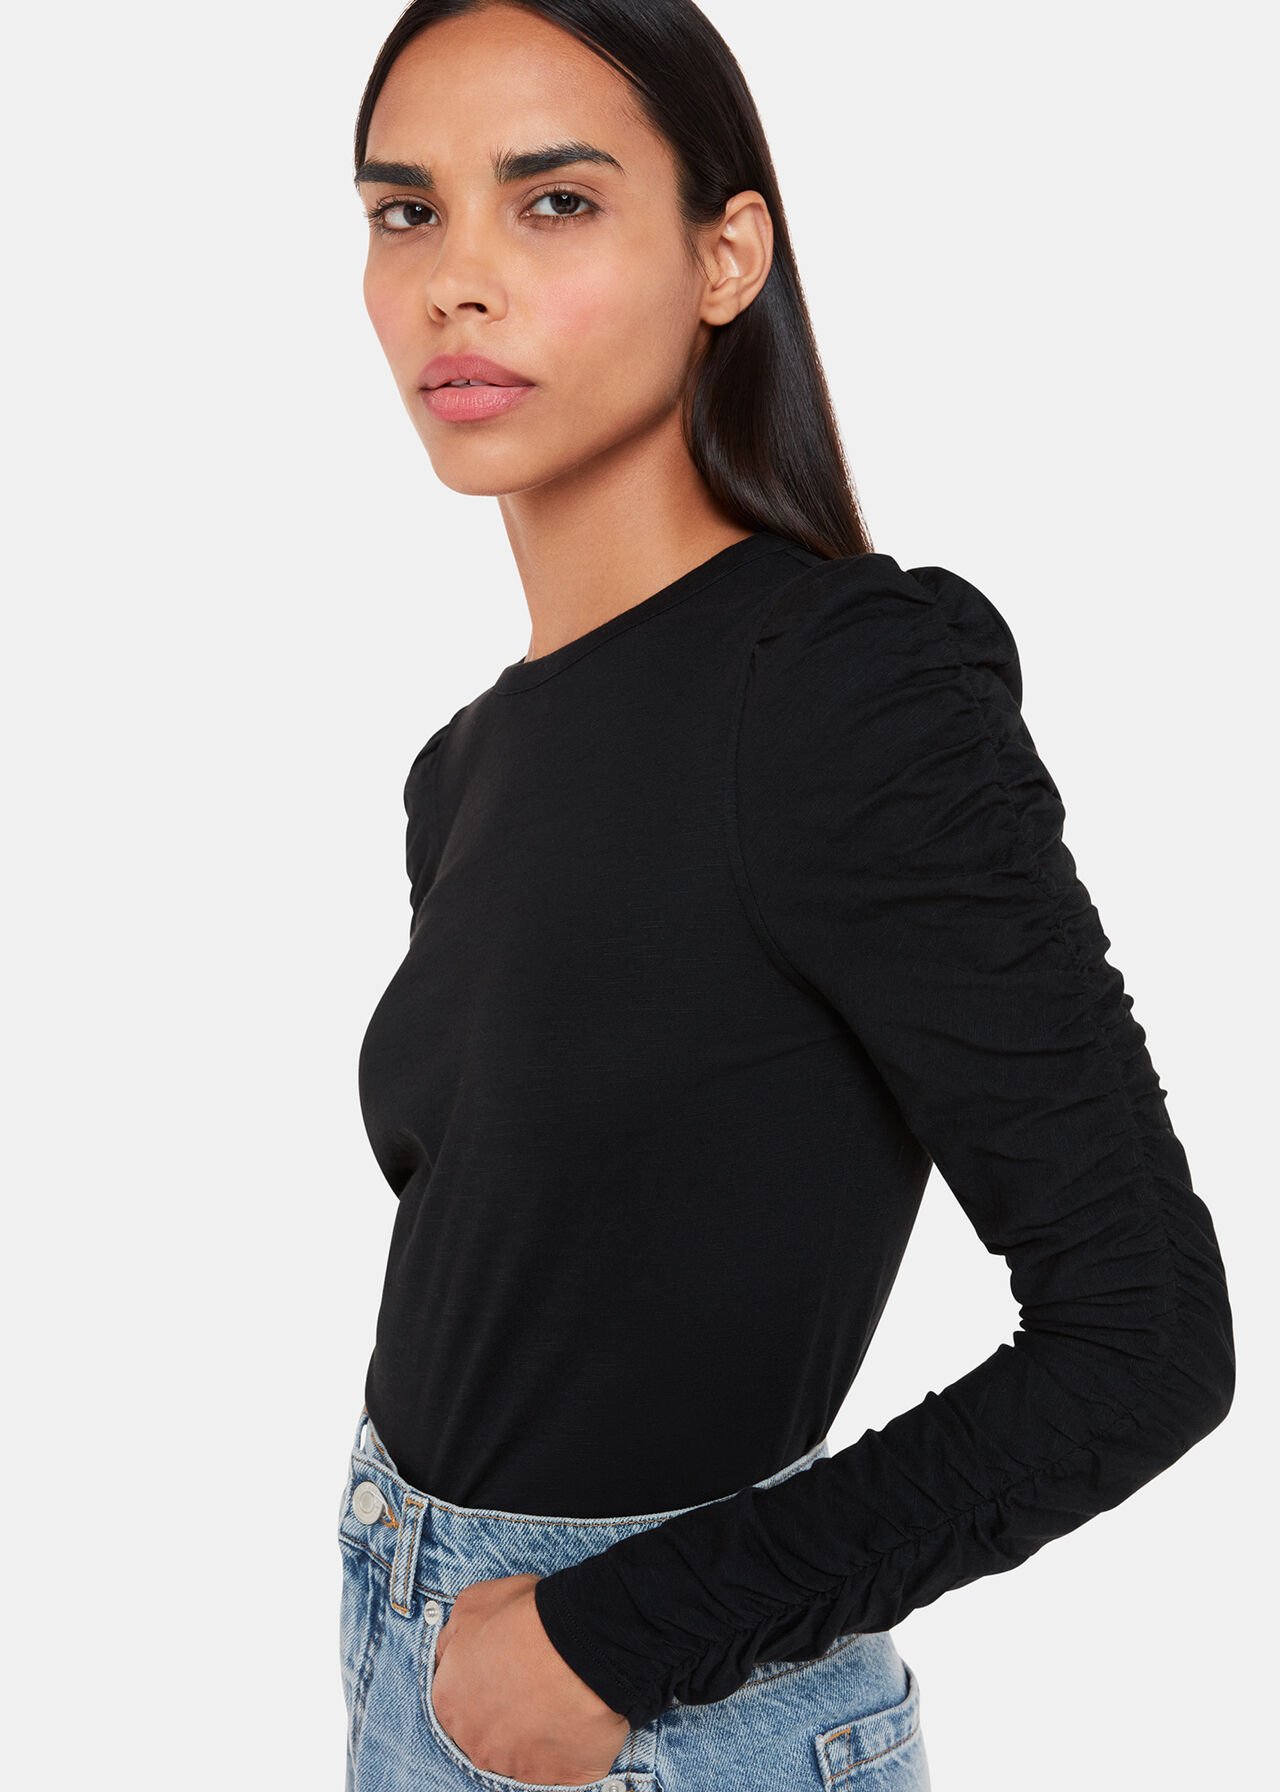 Black Ruched Sleeve Top | WHISTLES |